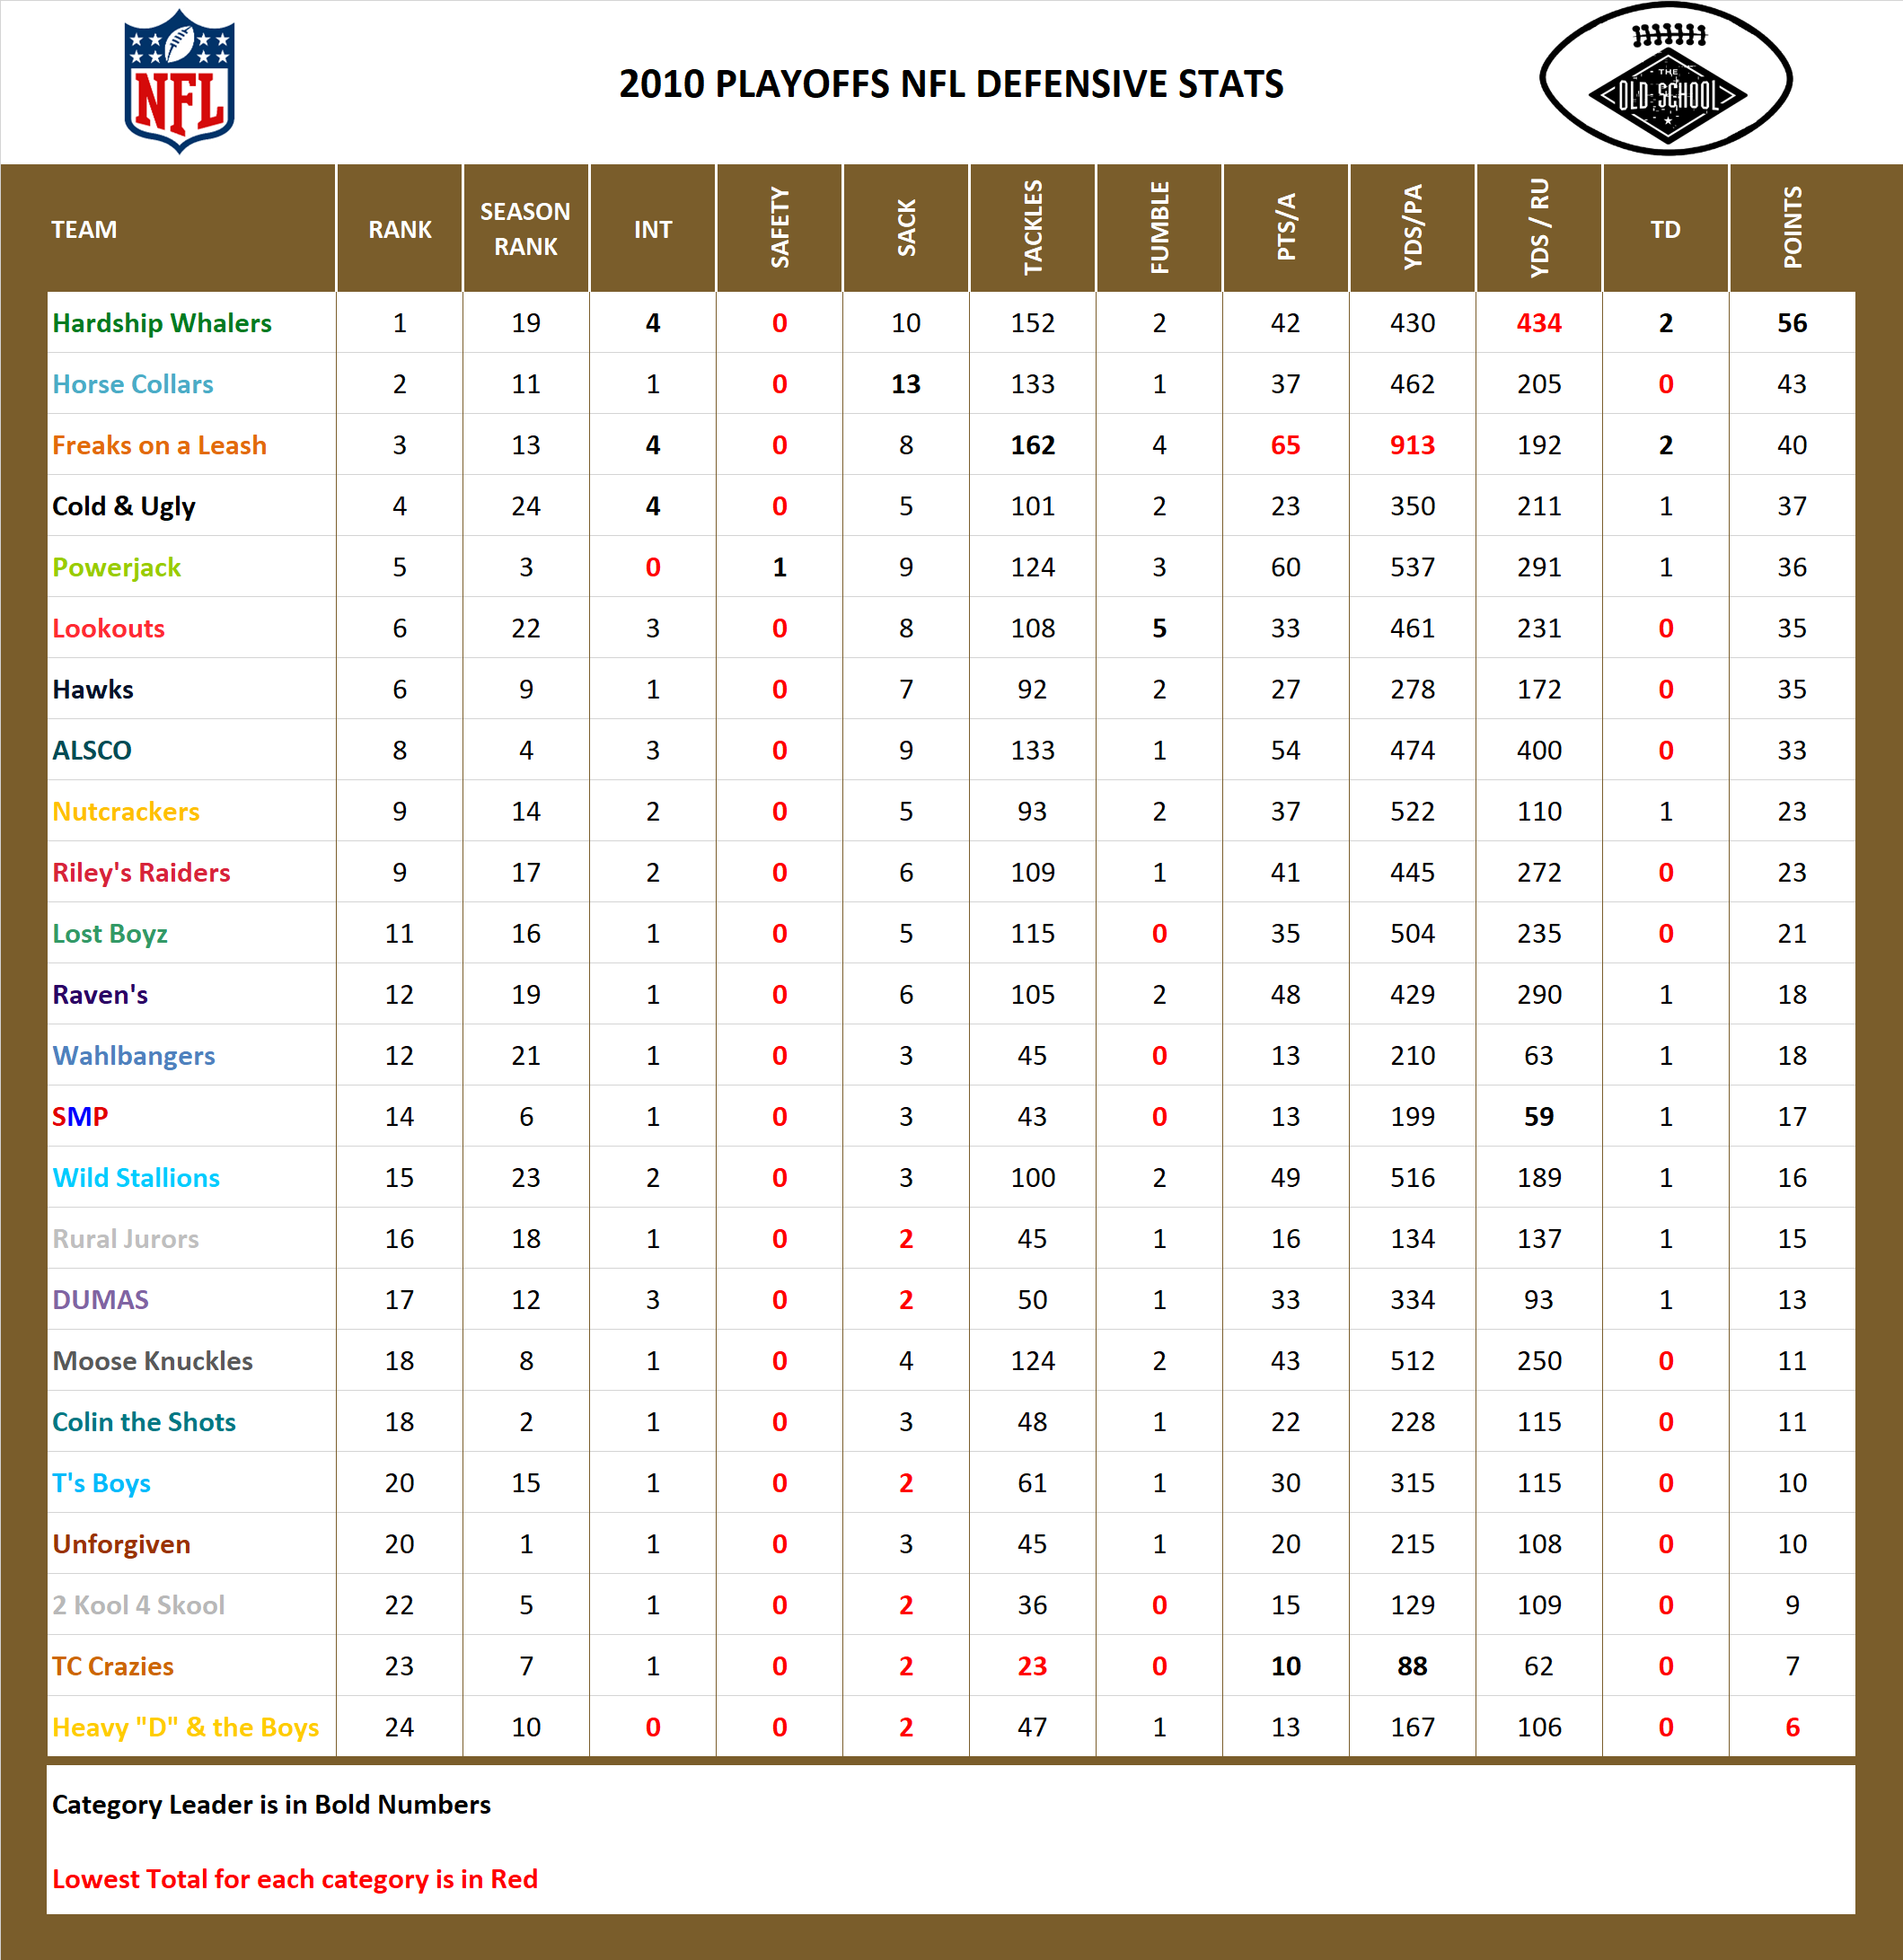 2010 National Football League Pool Playoff Defensive Stats